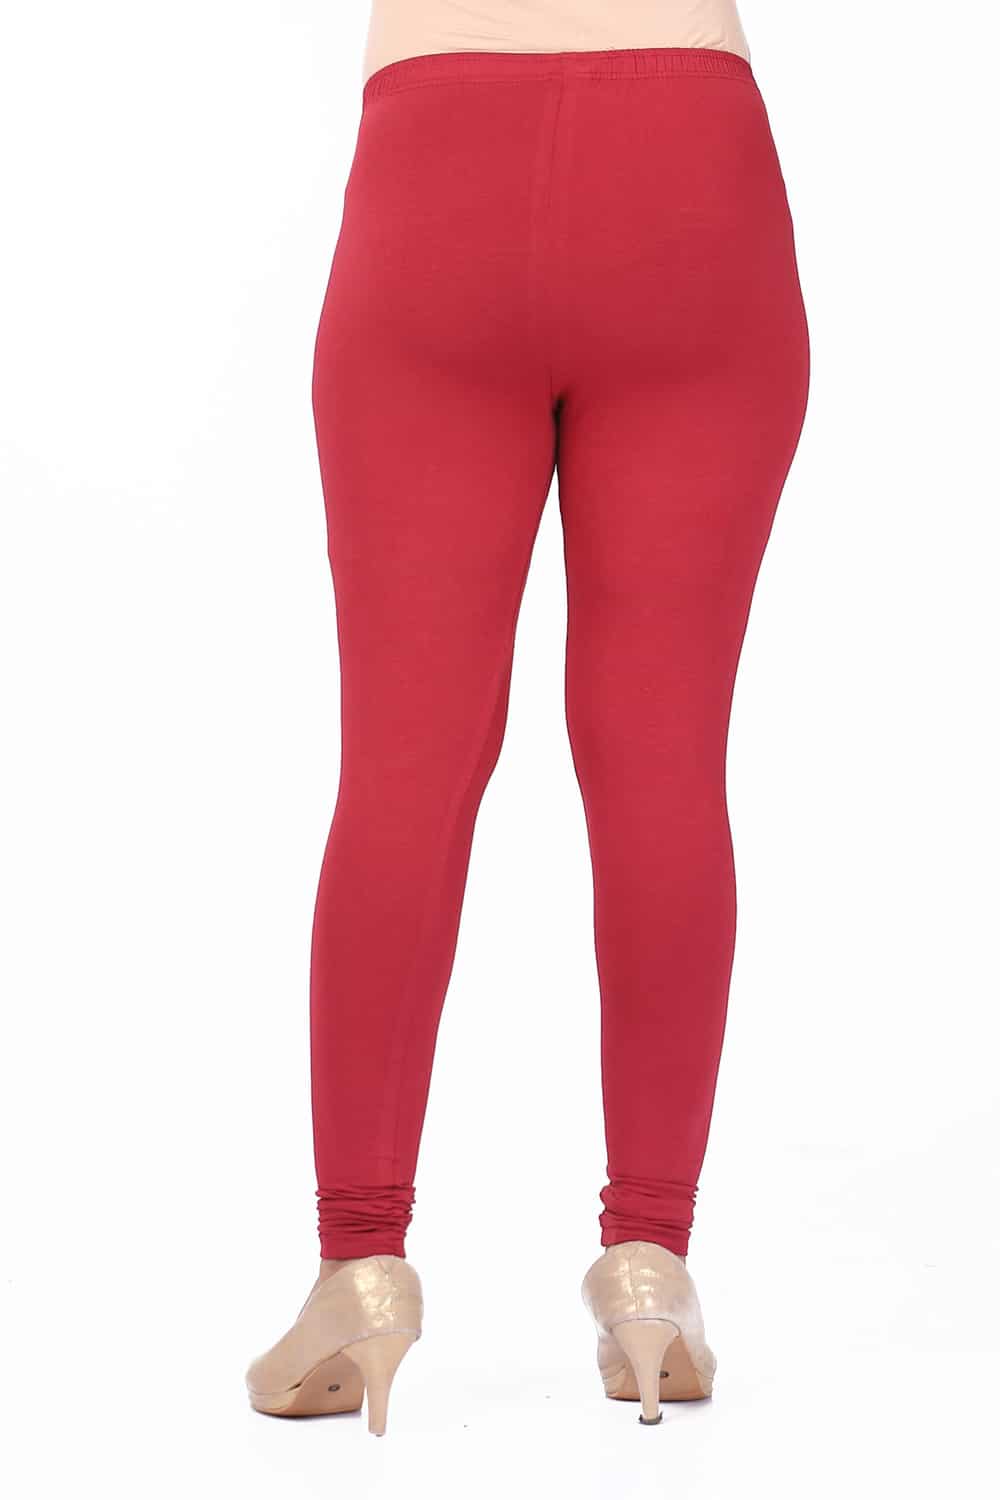 Carhartt Women's Force Fitted Low Waist Ankle Length Plus Size Leggings |  Academy